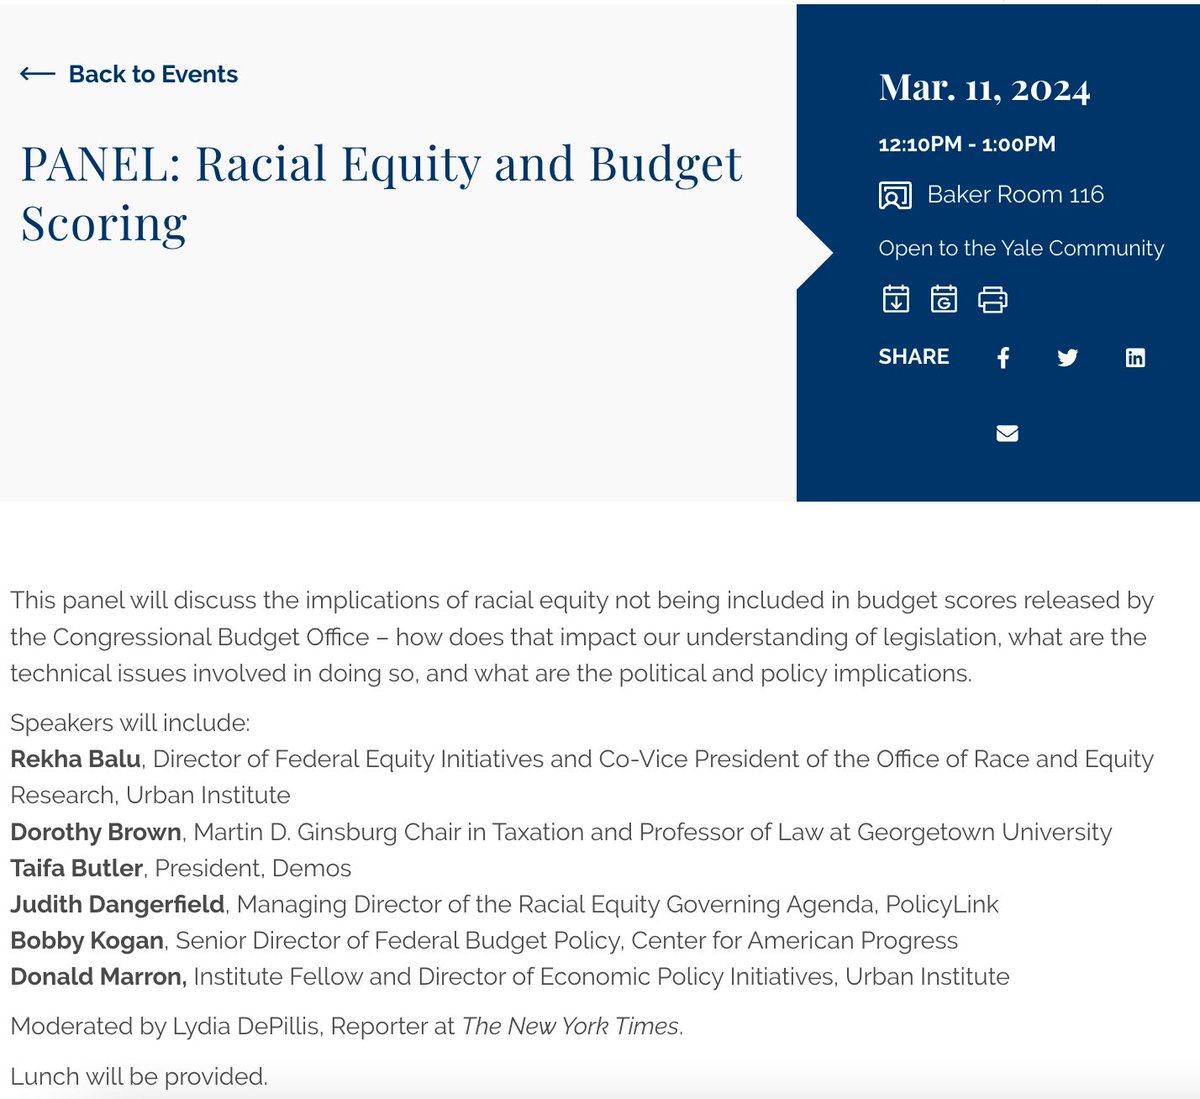 This Monday, March 11, join our colleagues at @YaleLawSch for the panel 'Racial Equity and Budget Scoring'

Ft. Rekha Balu (@urbaninstitute), @DorothyABrown, Judith Dangerfield (@policylink), @TaifaButler, @BBKogan, @dmarron, & @lydiadepillis

More info: law.yale.edu/yls-today/yale…